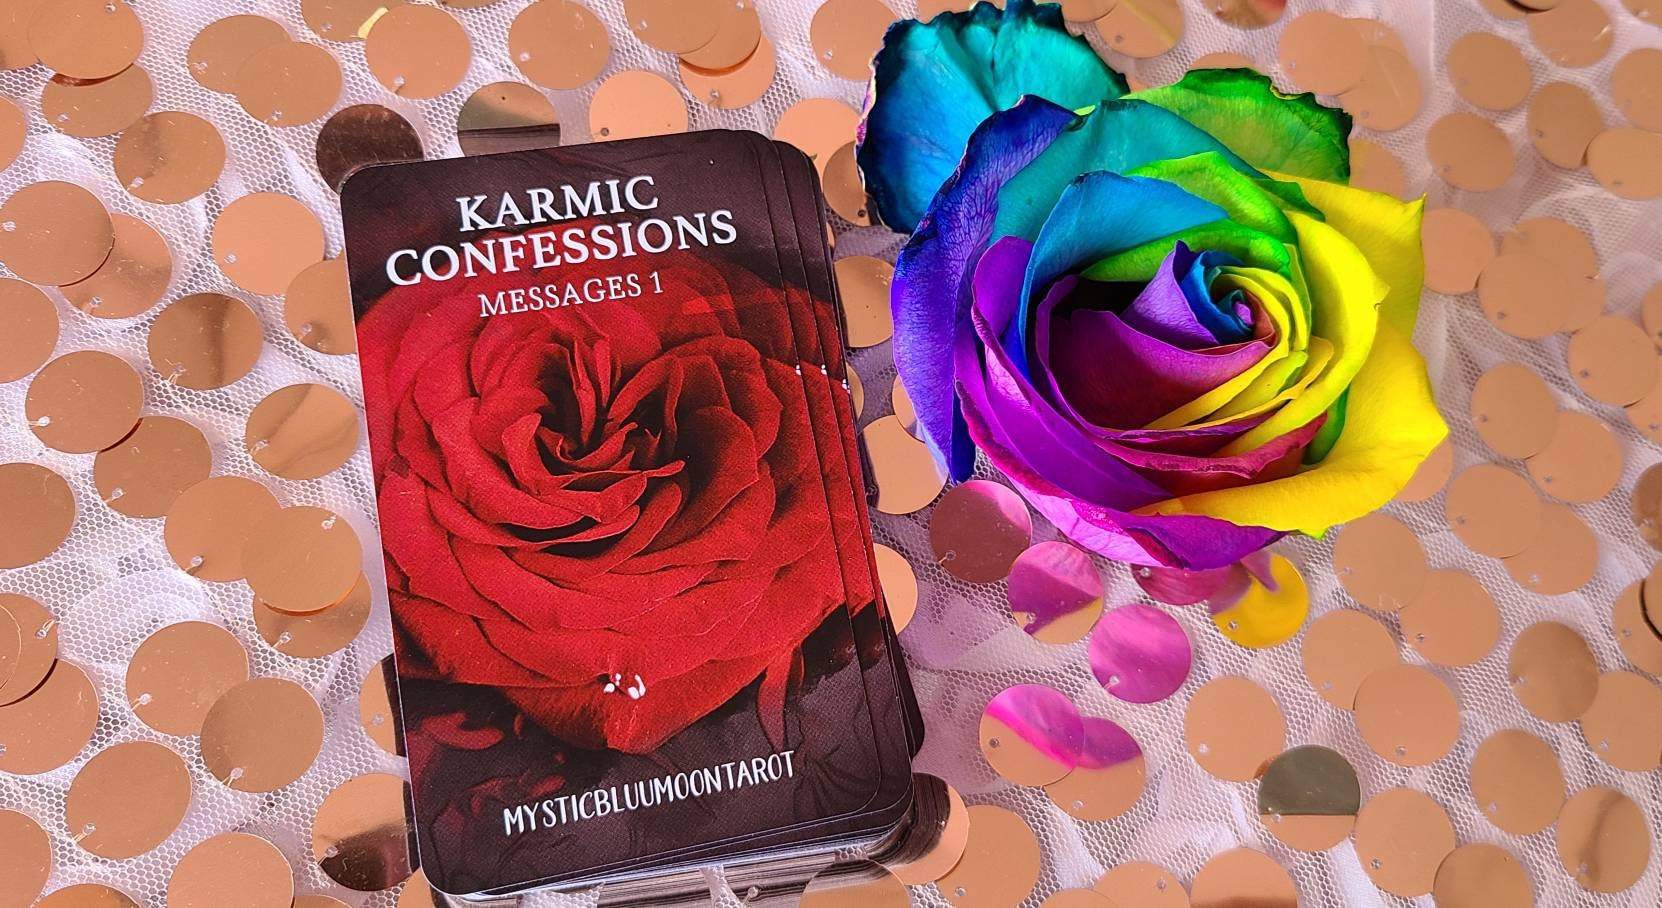 Karmic Confessions Messages 1 Oracle Deck Tarot Cards Messages From The Other Woman Mysticbluumoontarot - MysticBluuMoonTarot